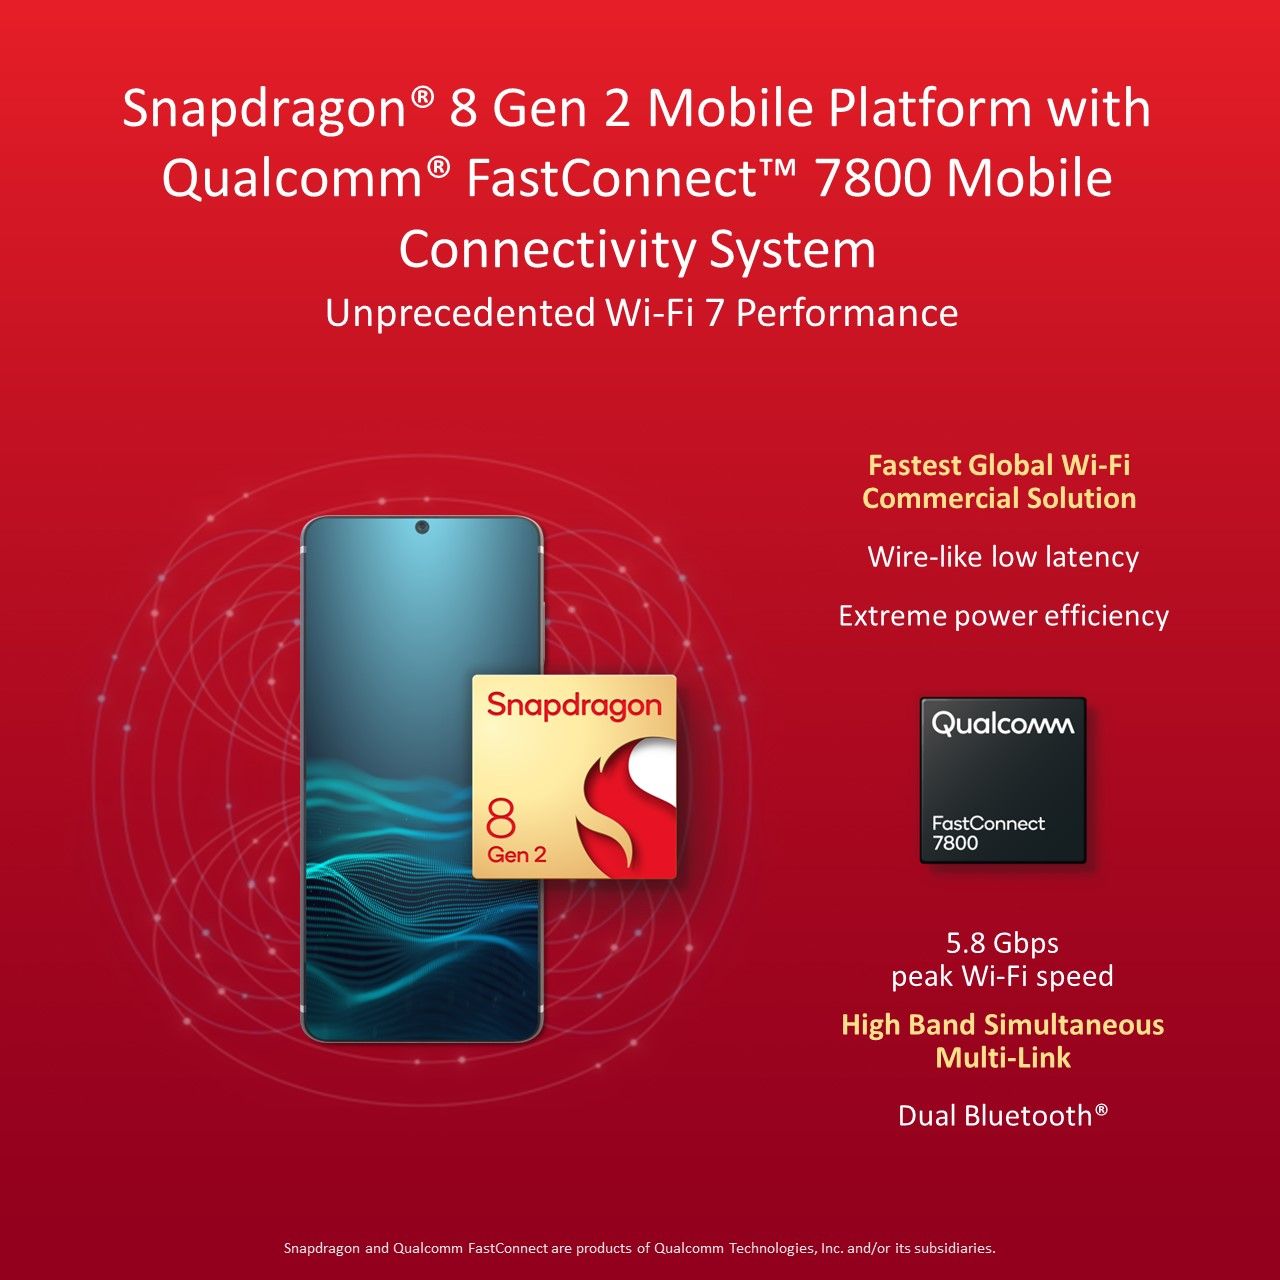 Qualcomm FastConnect 7800 in Snapdragon 8 Gen 2